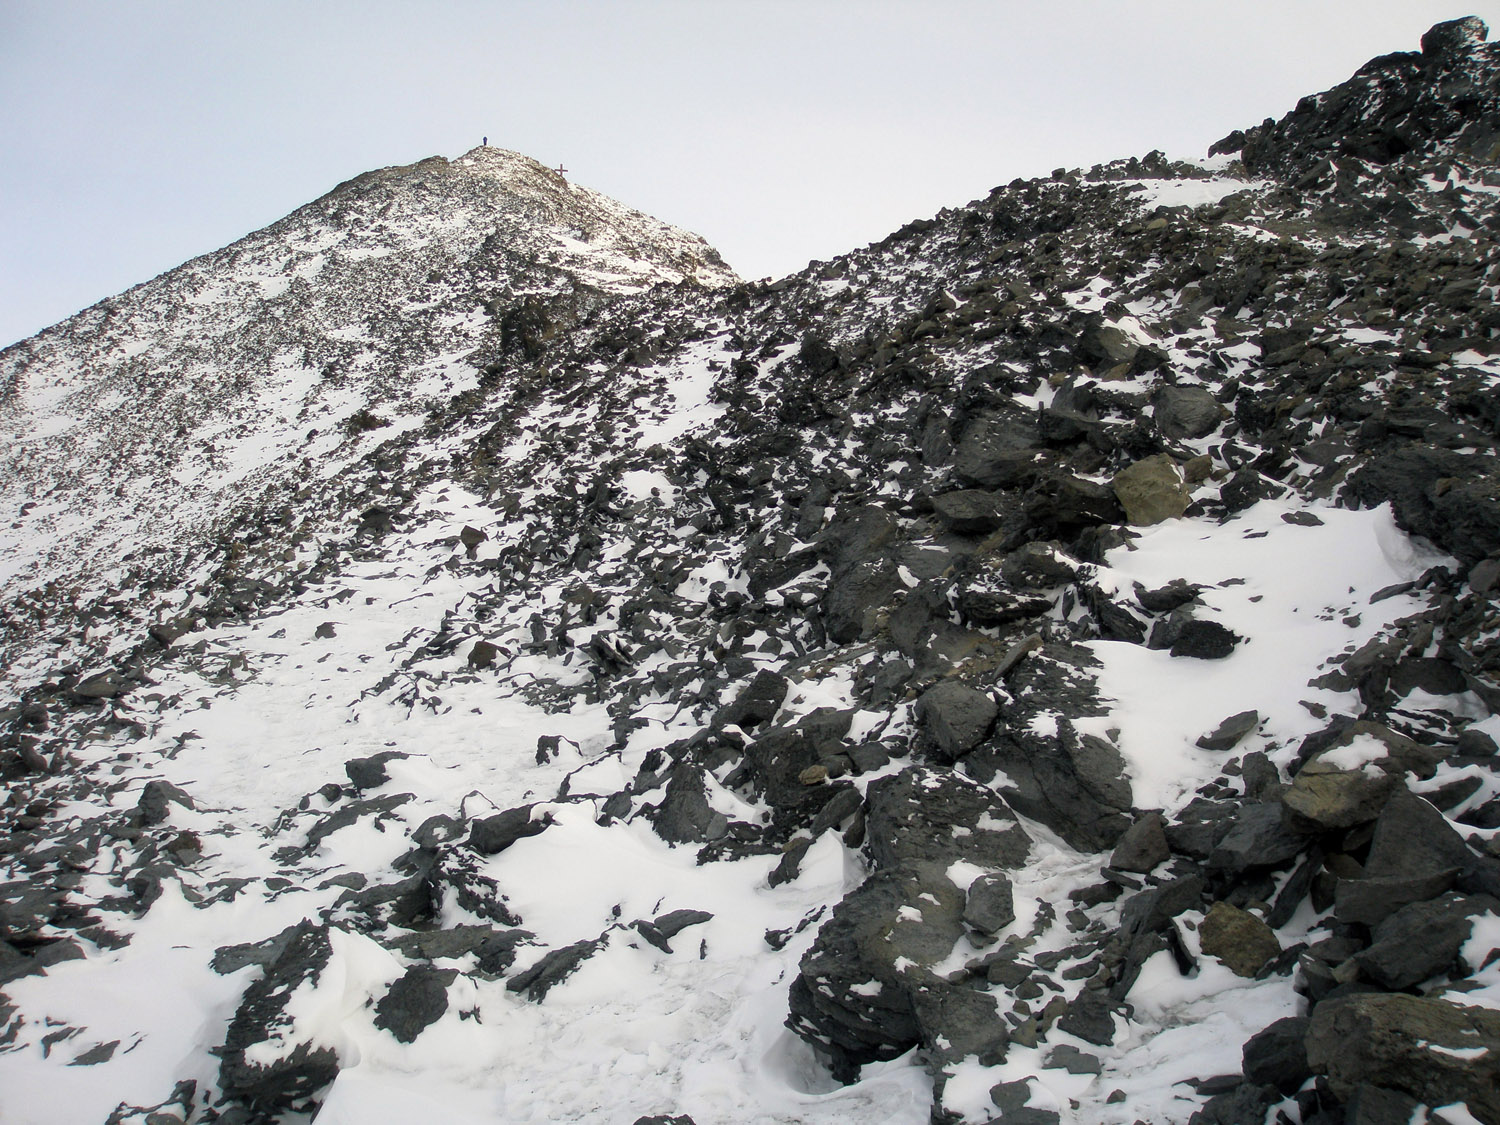 Looking back at the summit, while descending Observation Hill